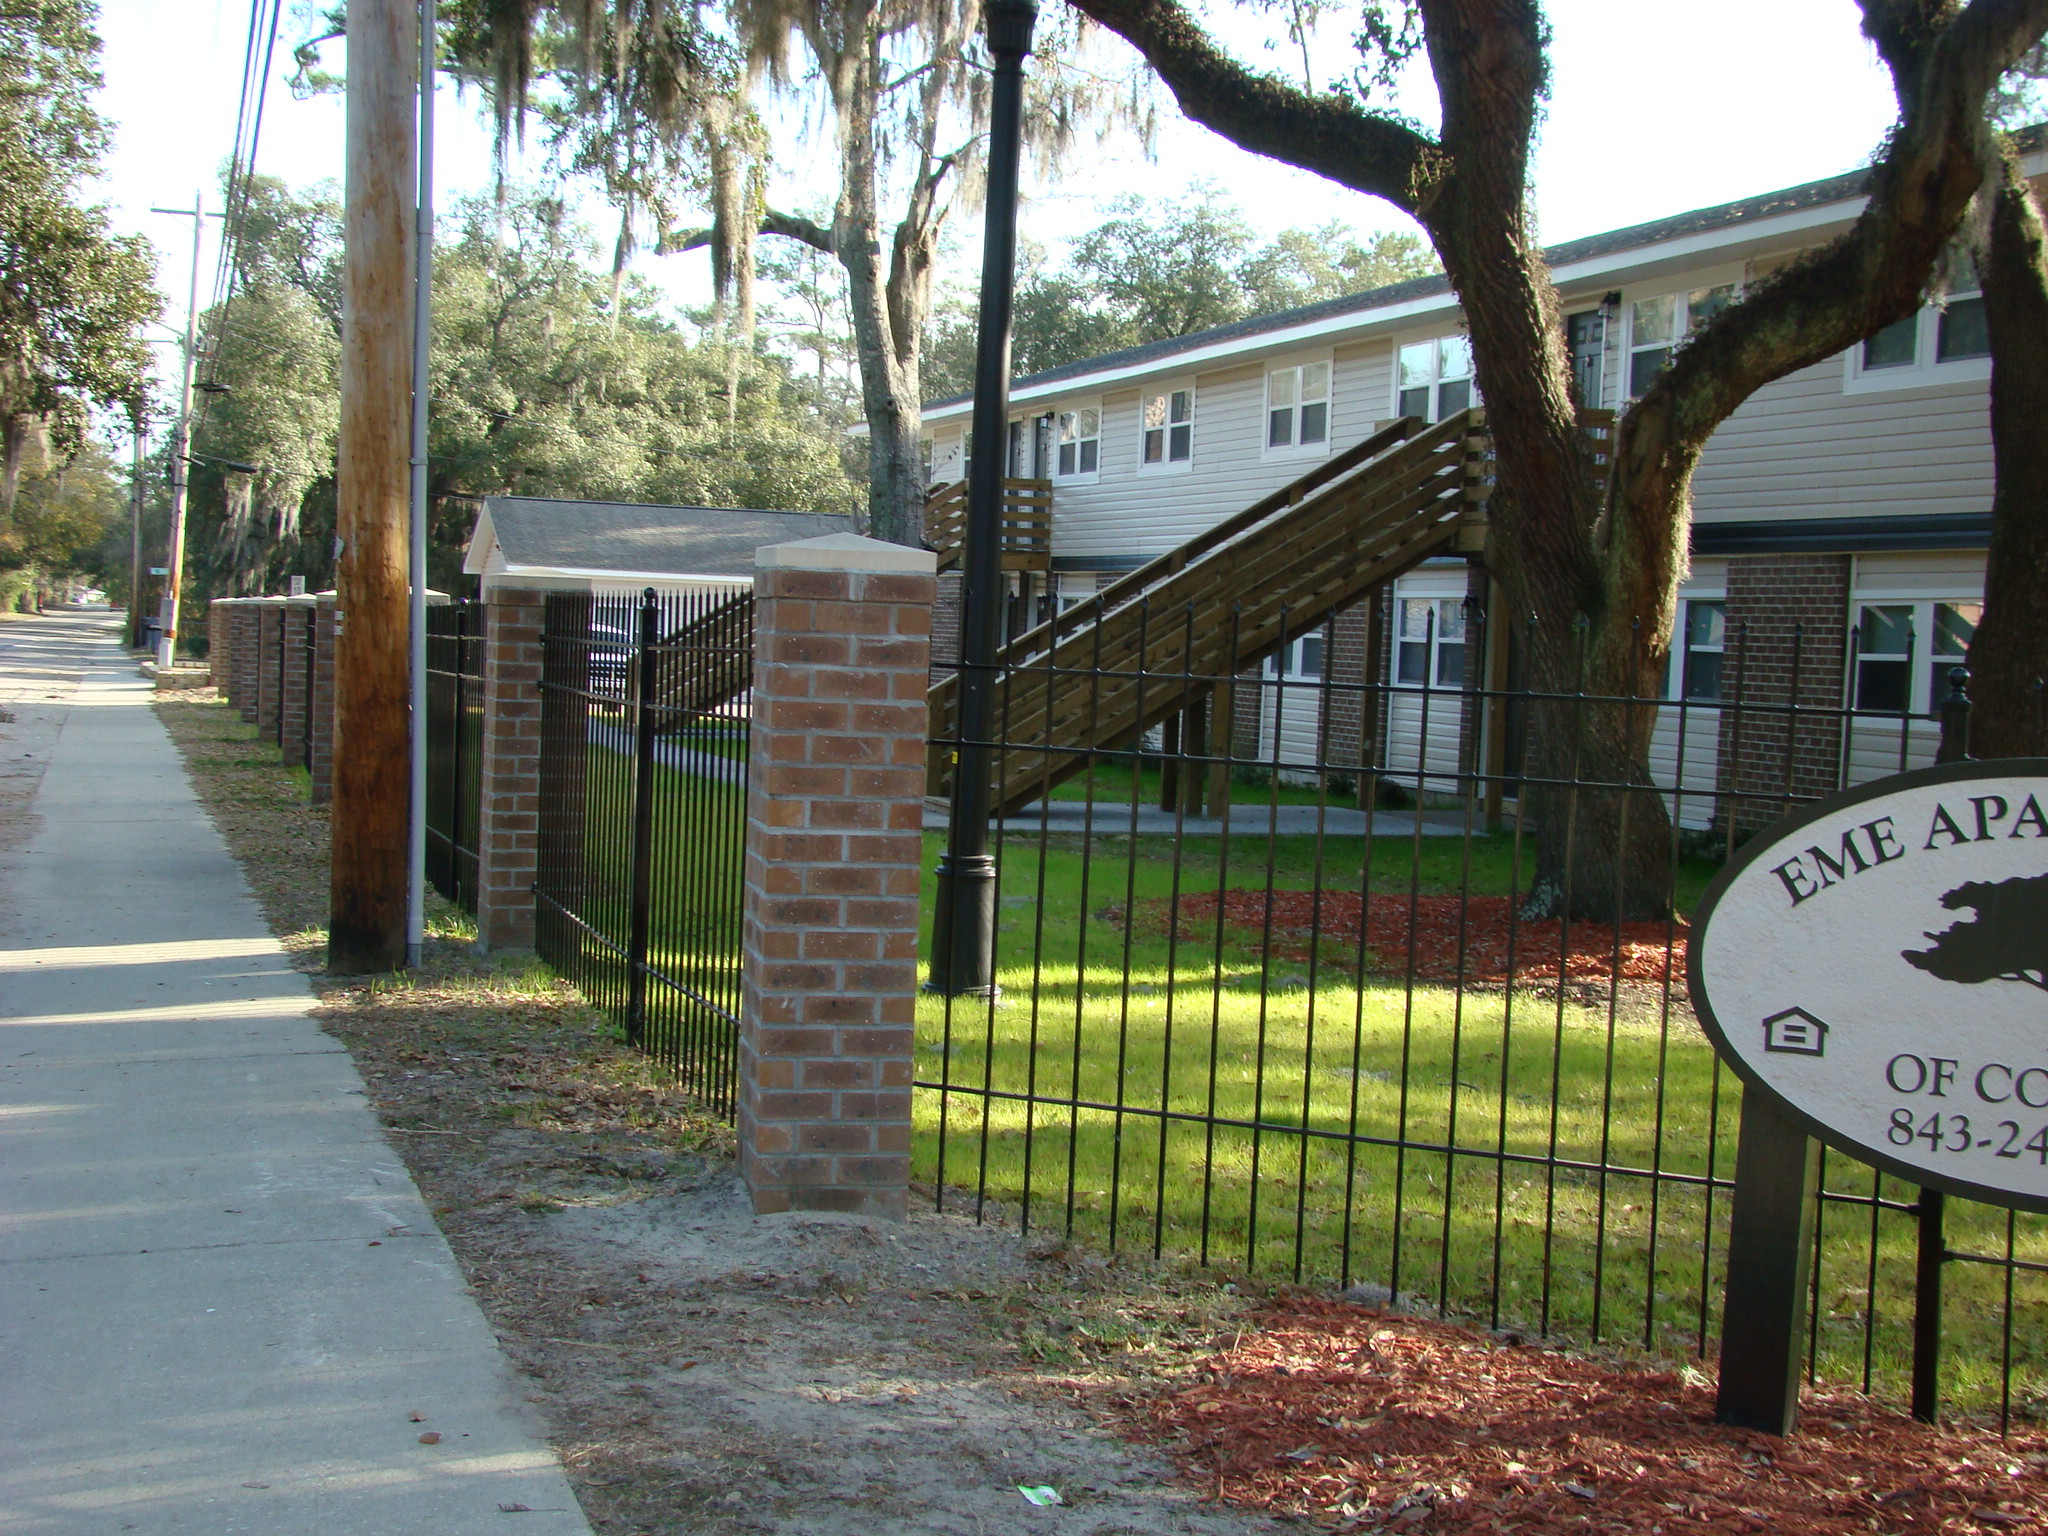 EME APARTMENTS OF CONWAY